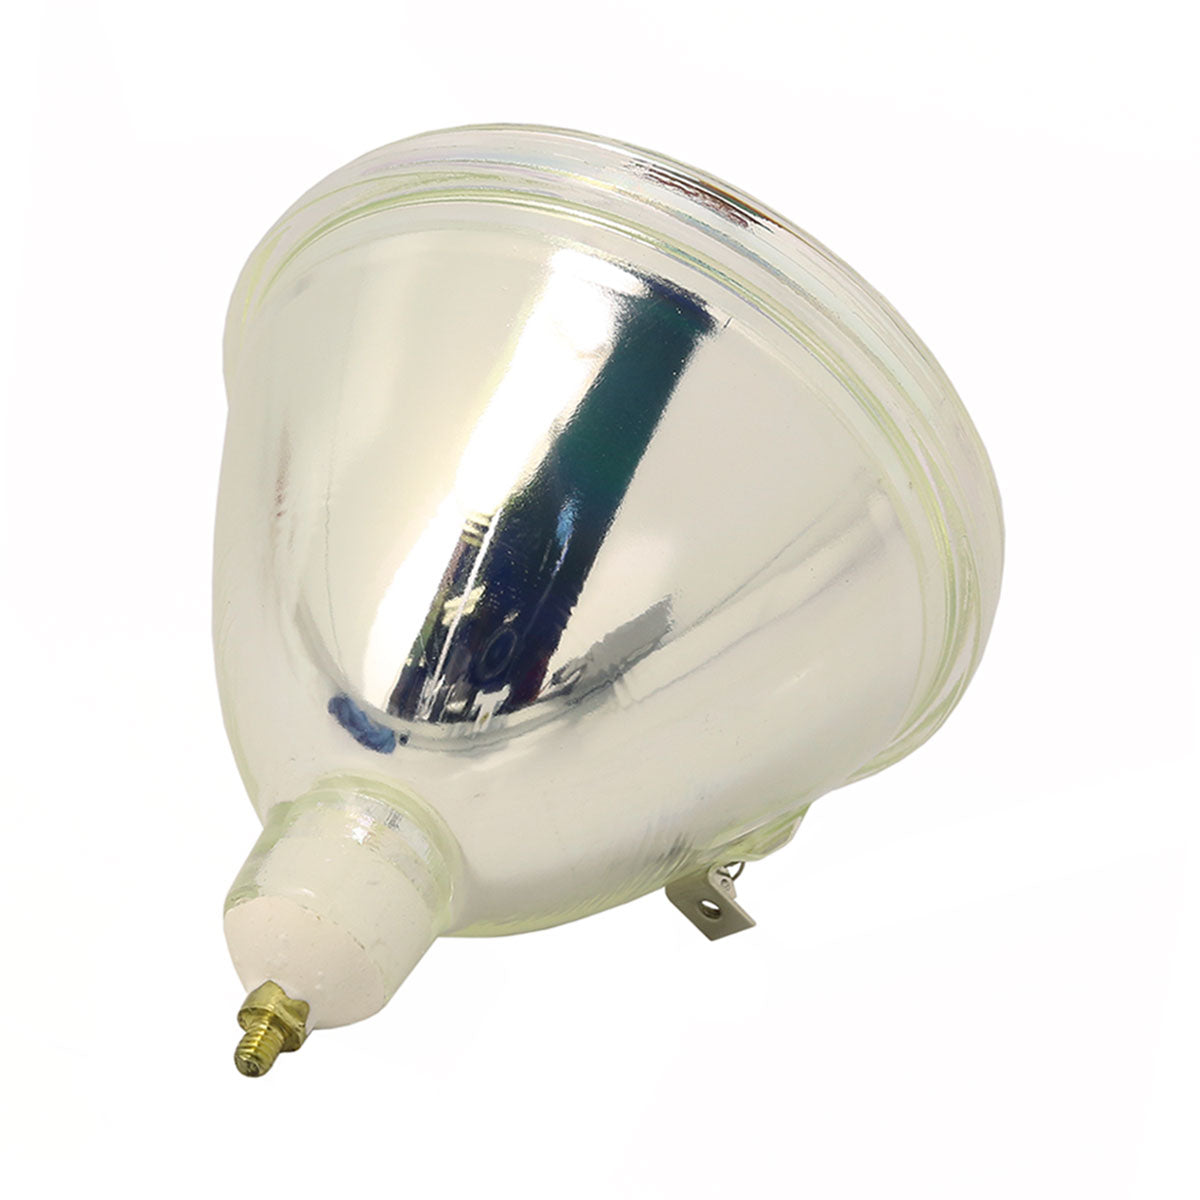 Syntax Olevia LC-T50HV Bare TV Lamp